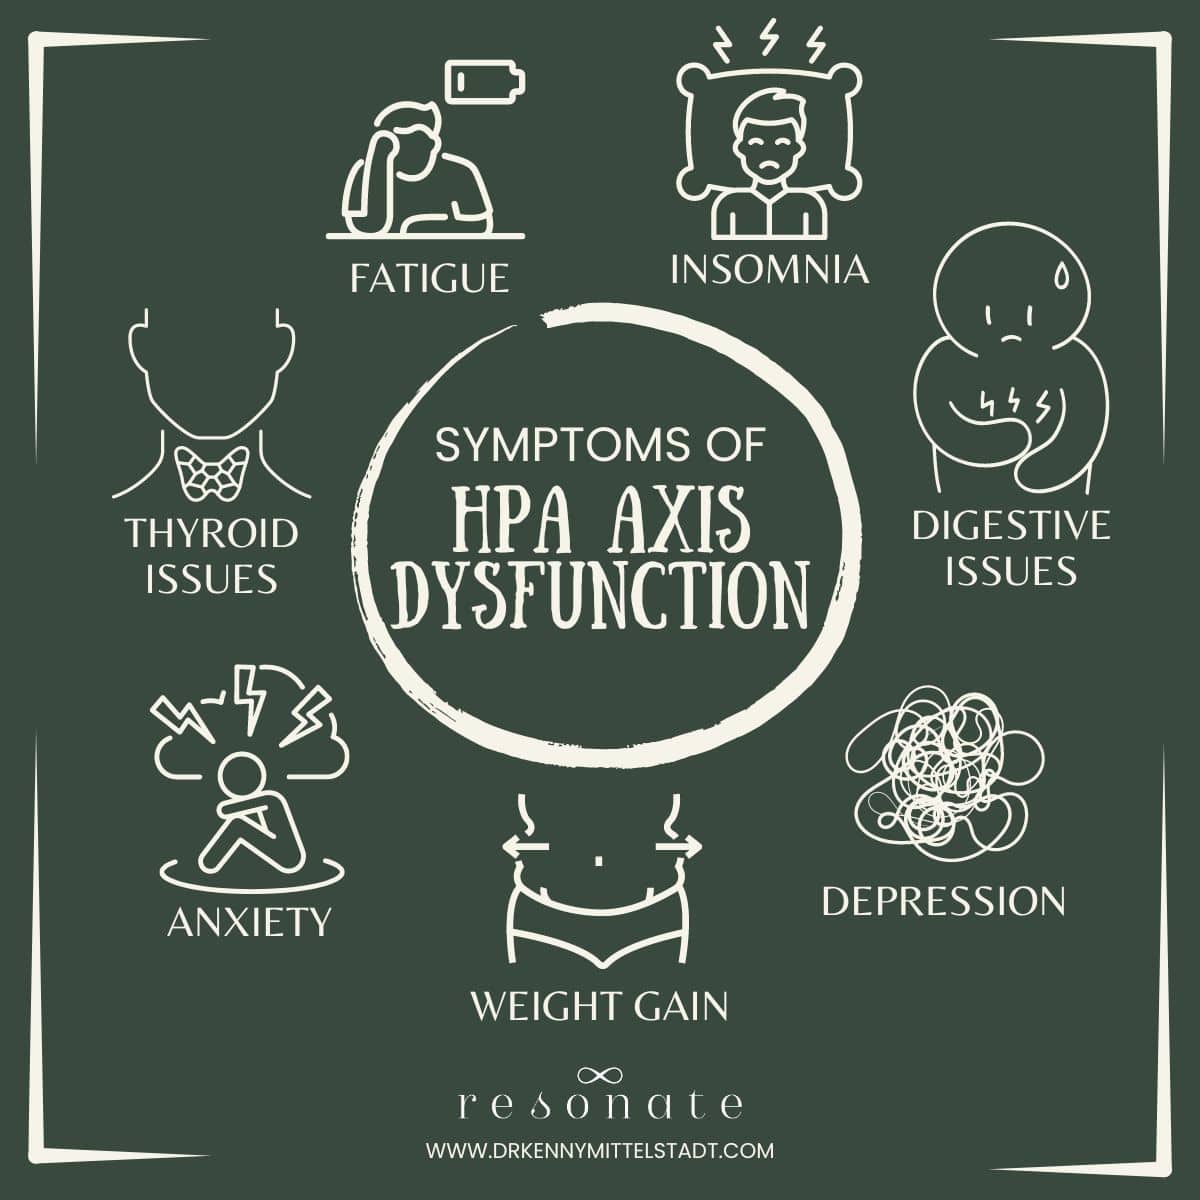 This graphic highlights some of the main symptoms of HPA Axis Dysfunction ("adrenal fatigue") - these include fatigue, insomnia, thyroid issues, digestive issues, anxiety, depression, and weight gain.